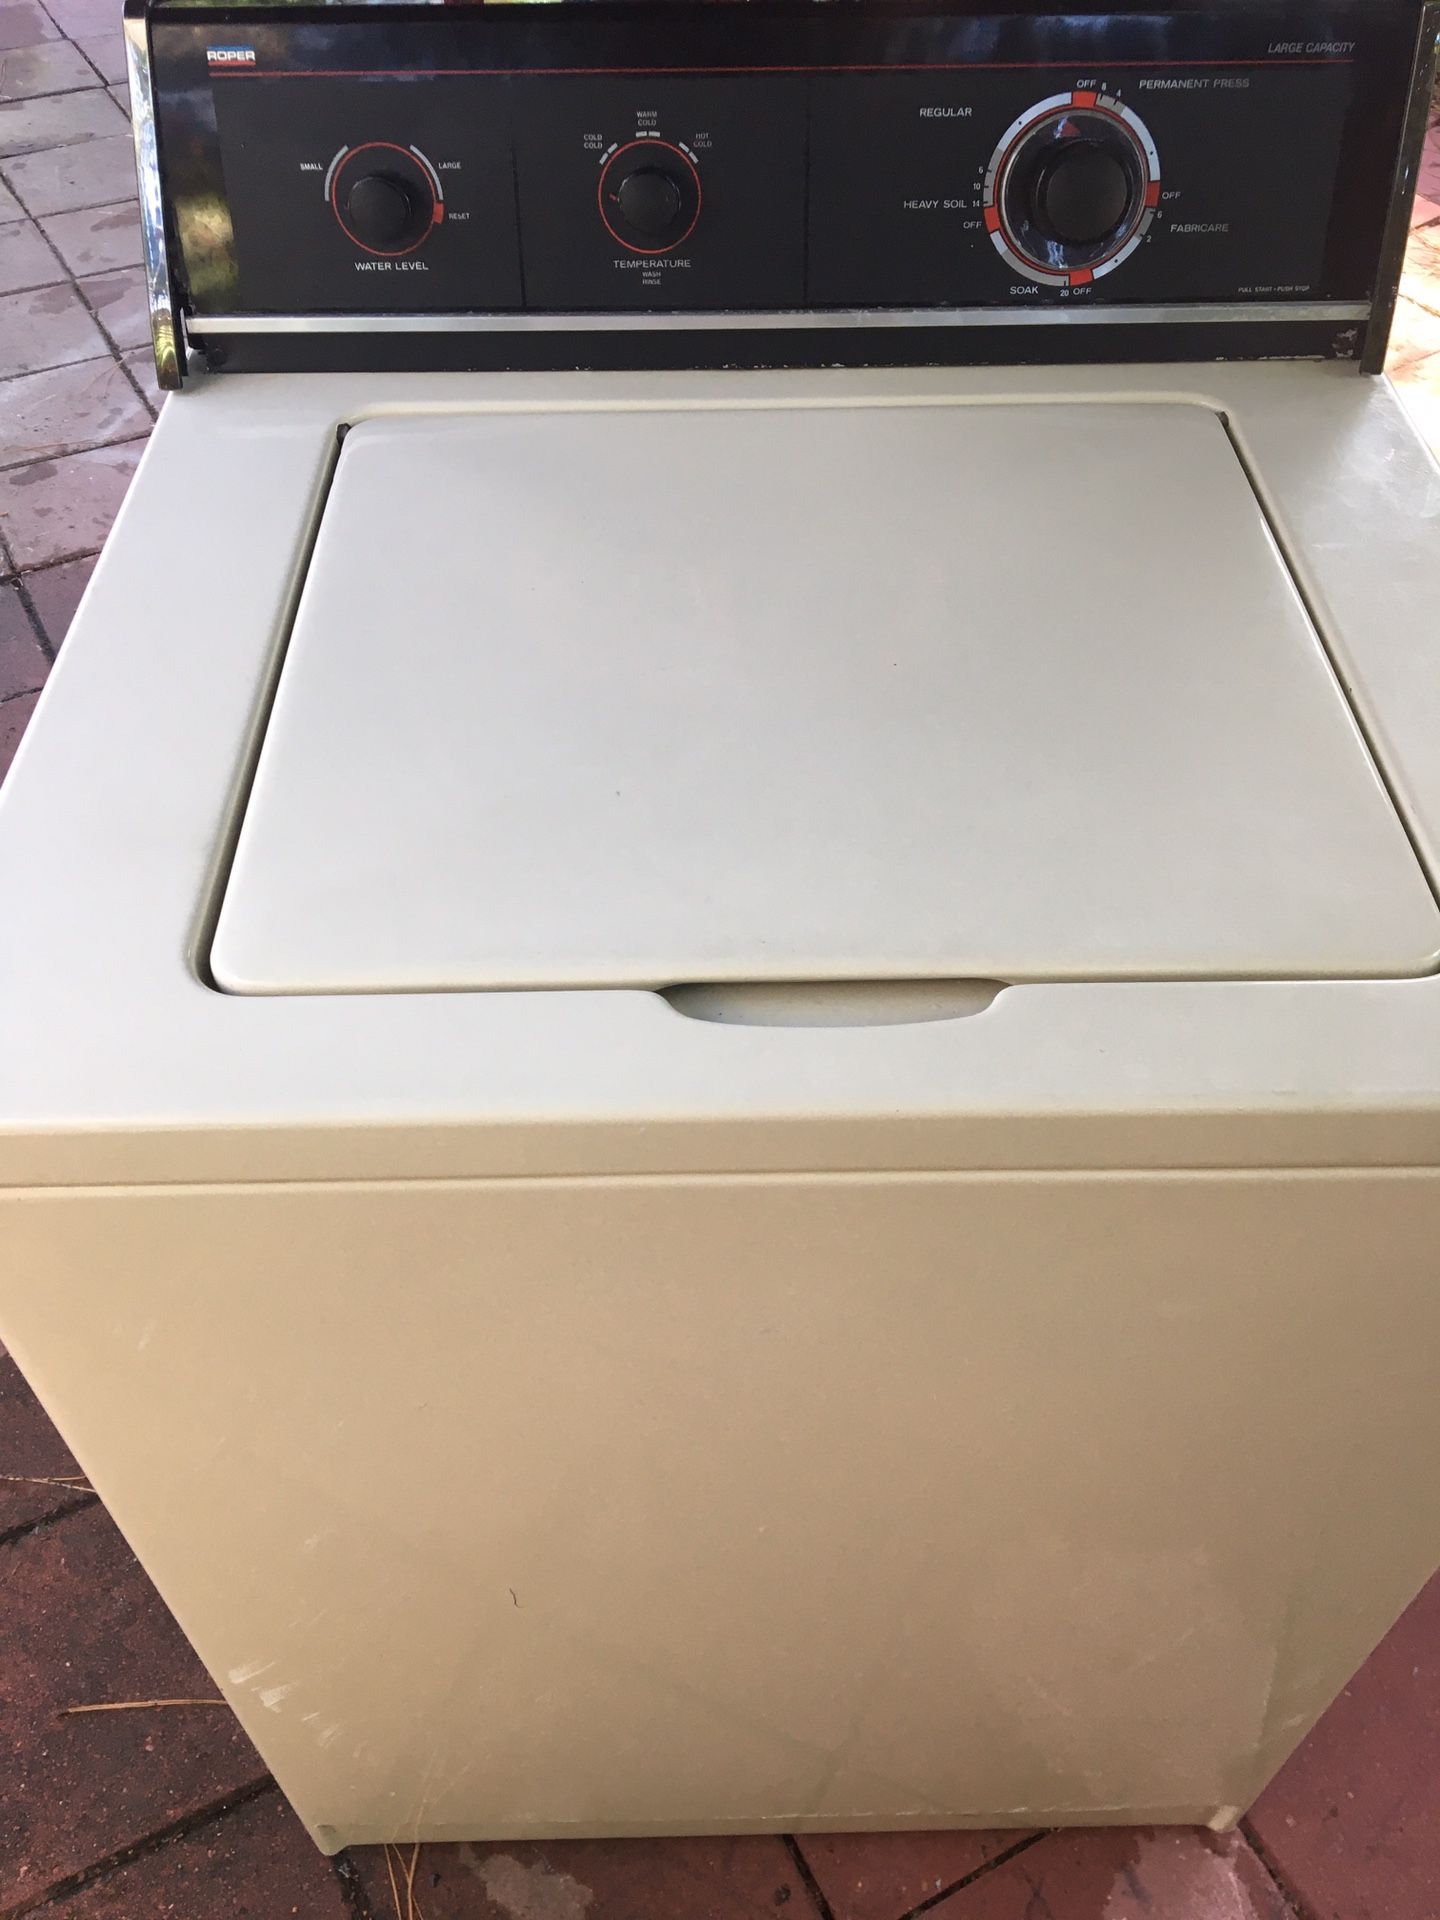 ROPER WASHER WASHING MACHINE WORKS PERFECT BUT ****LEAKS A LITTLE WATER DURING CYCLE PERFECT FOR OUTDOOR